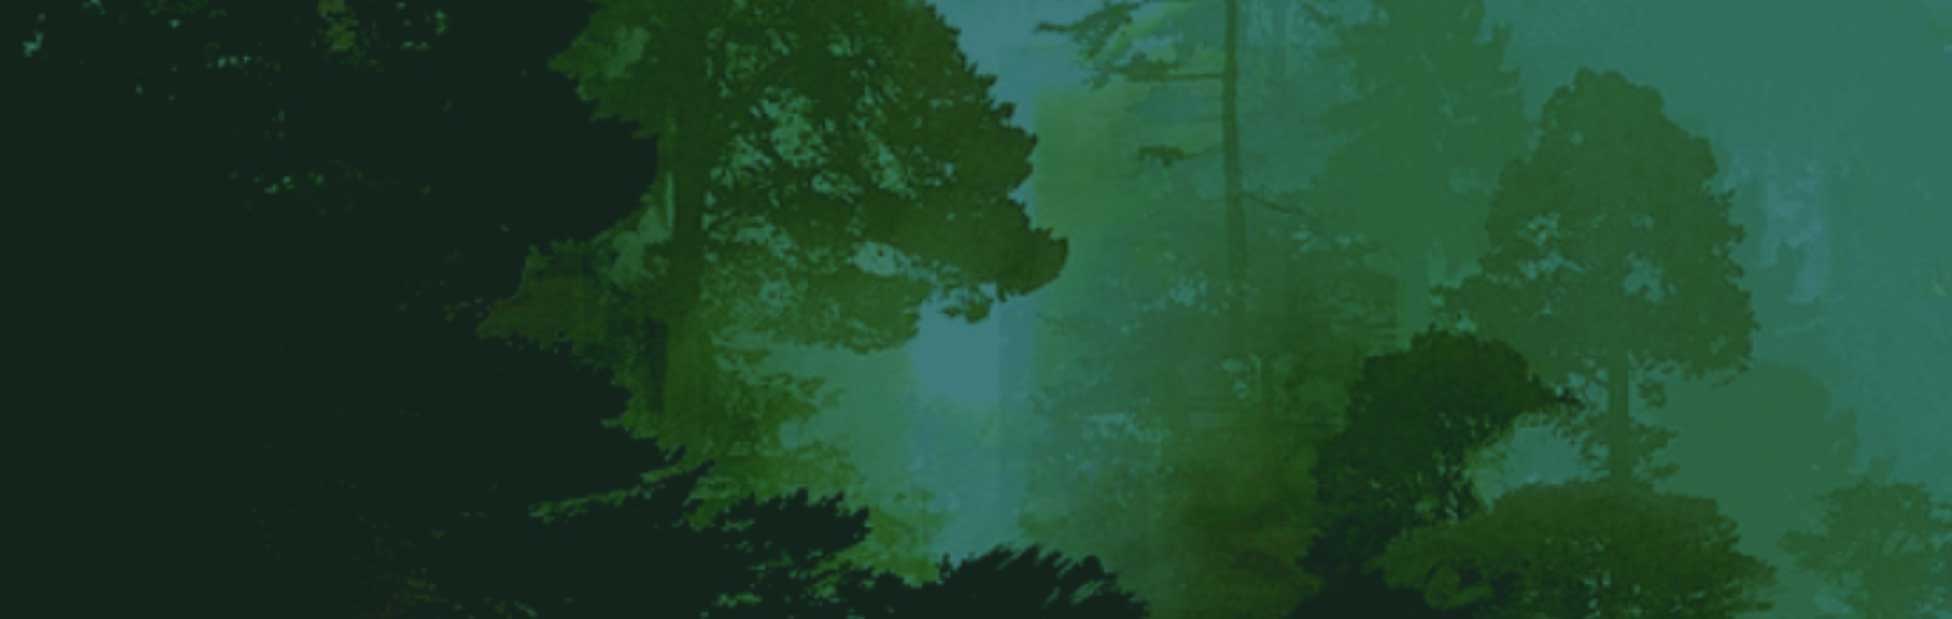 Green tinted forest silhouette 